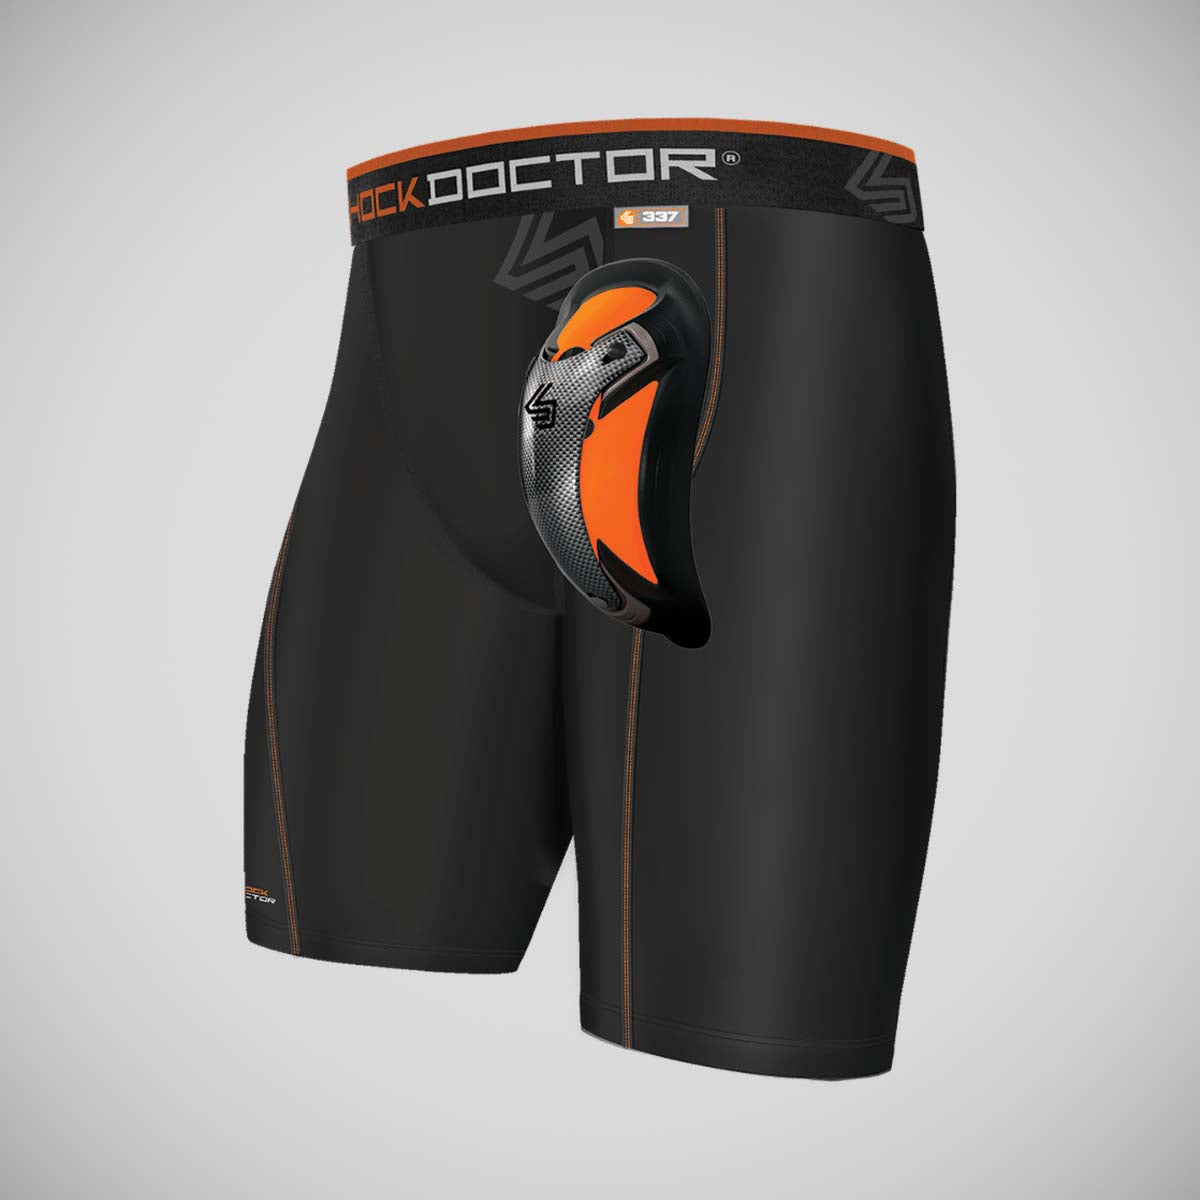 Shock Doctor UltraPro Compression Short with Cup from Made4Fighters